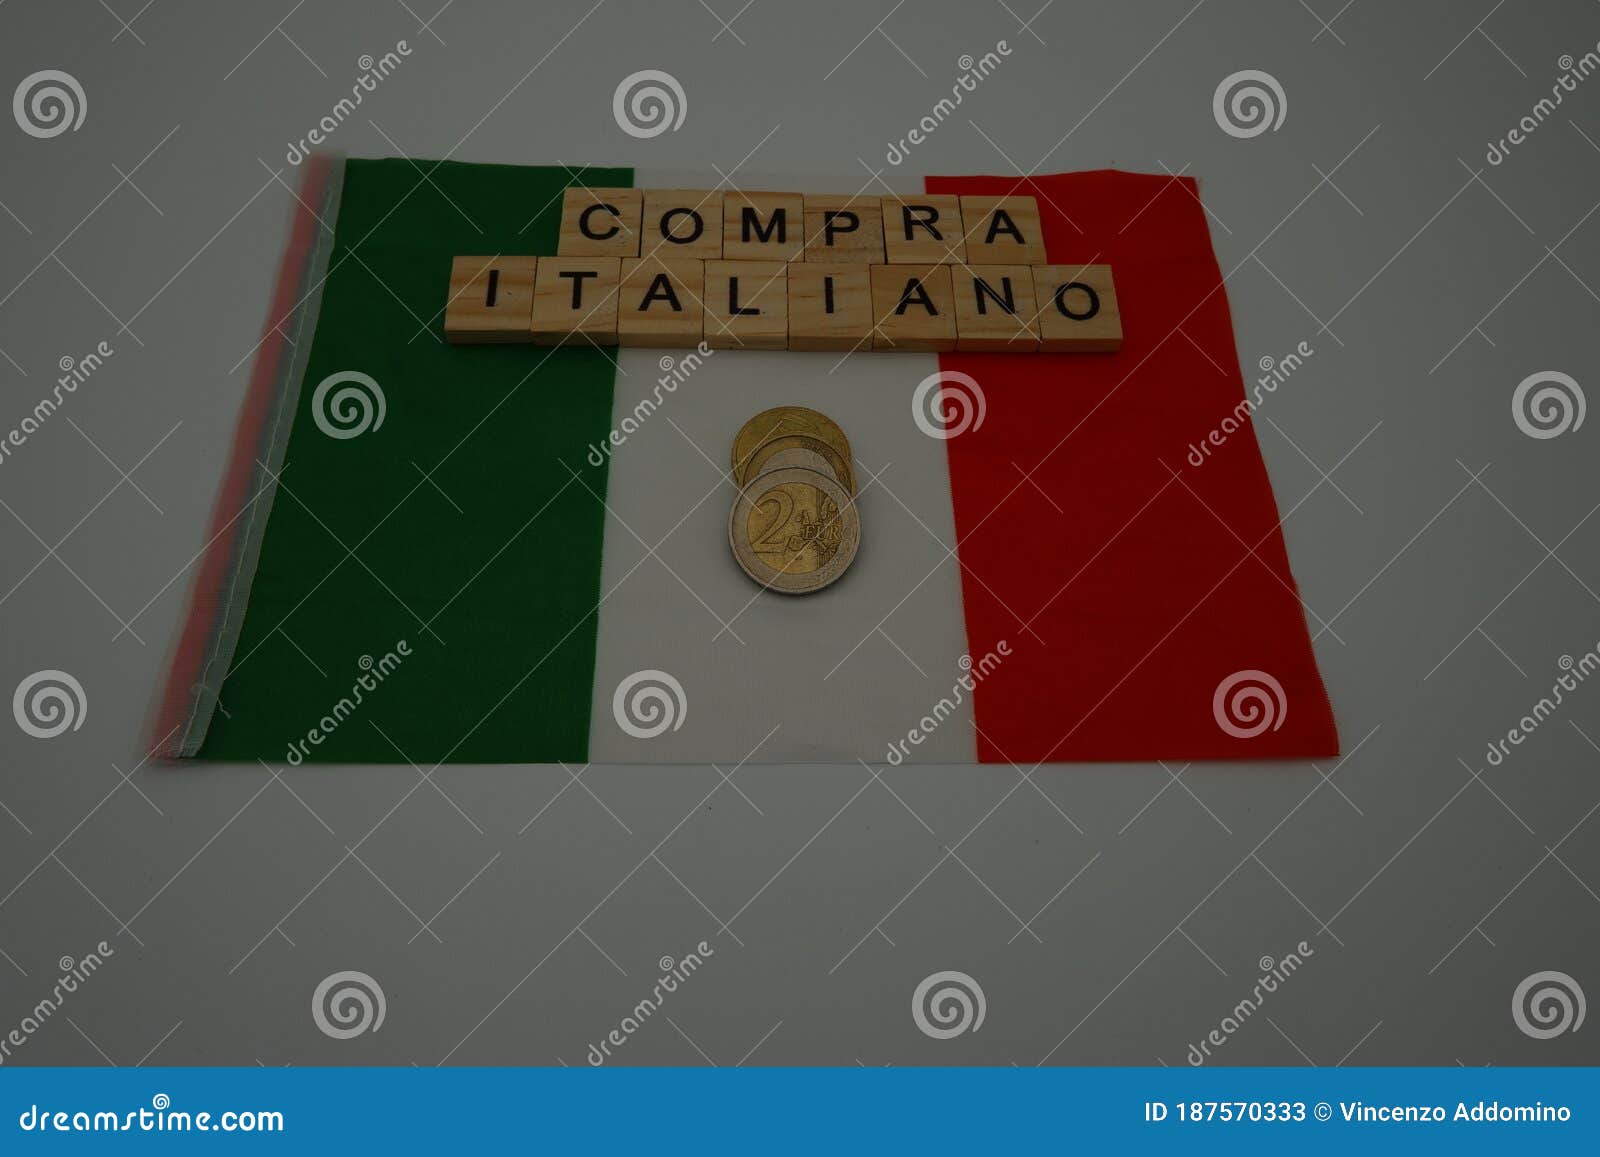 an italian flag with written,  compra italiano which in english means, buy italian and with some coins